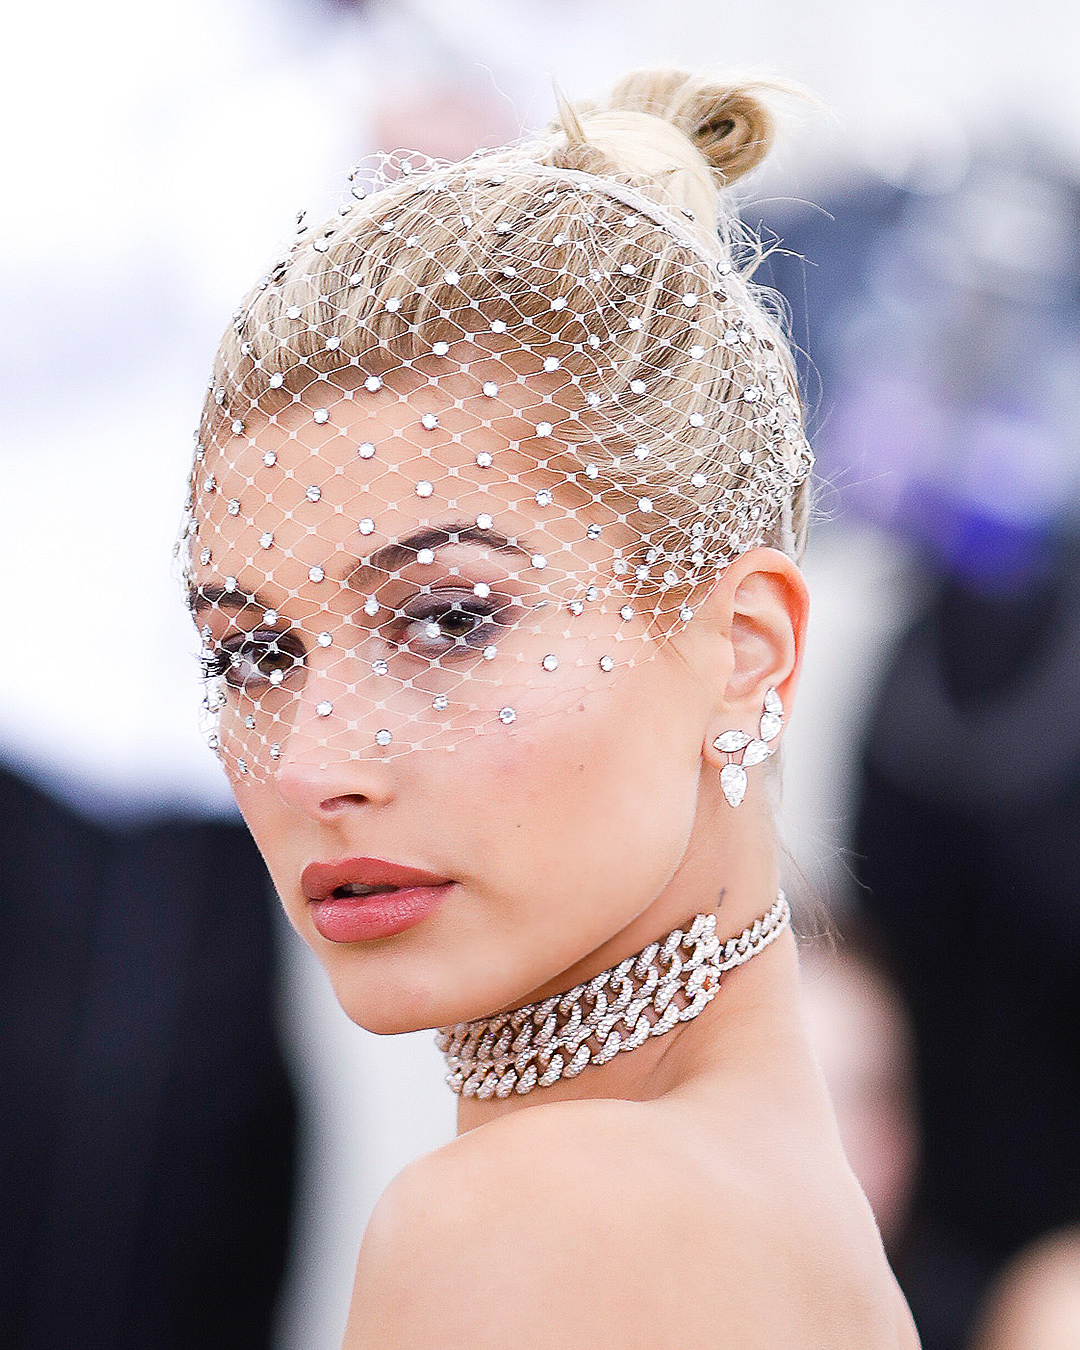 Hailey Baldwin Swaps Engagement Ring For Diamond Wedding Band And Is She  Already Married?